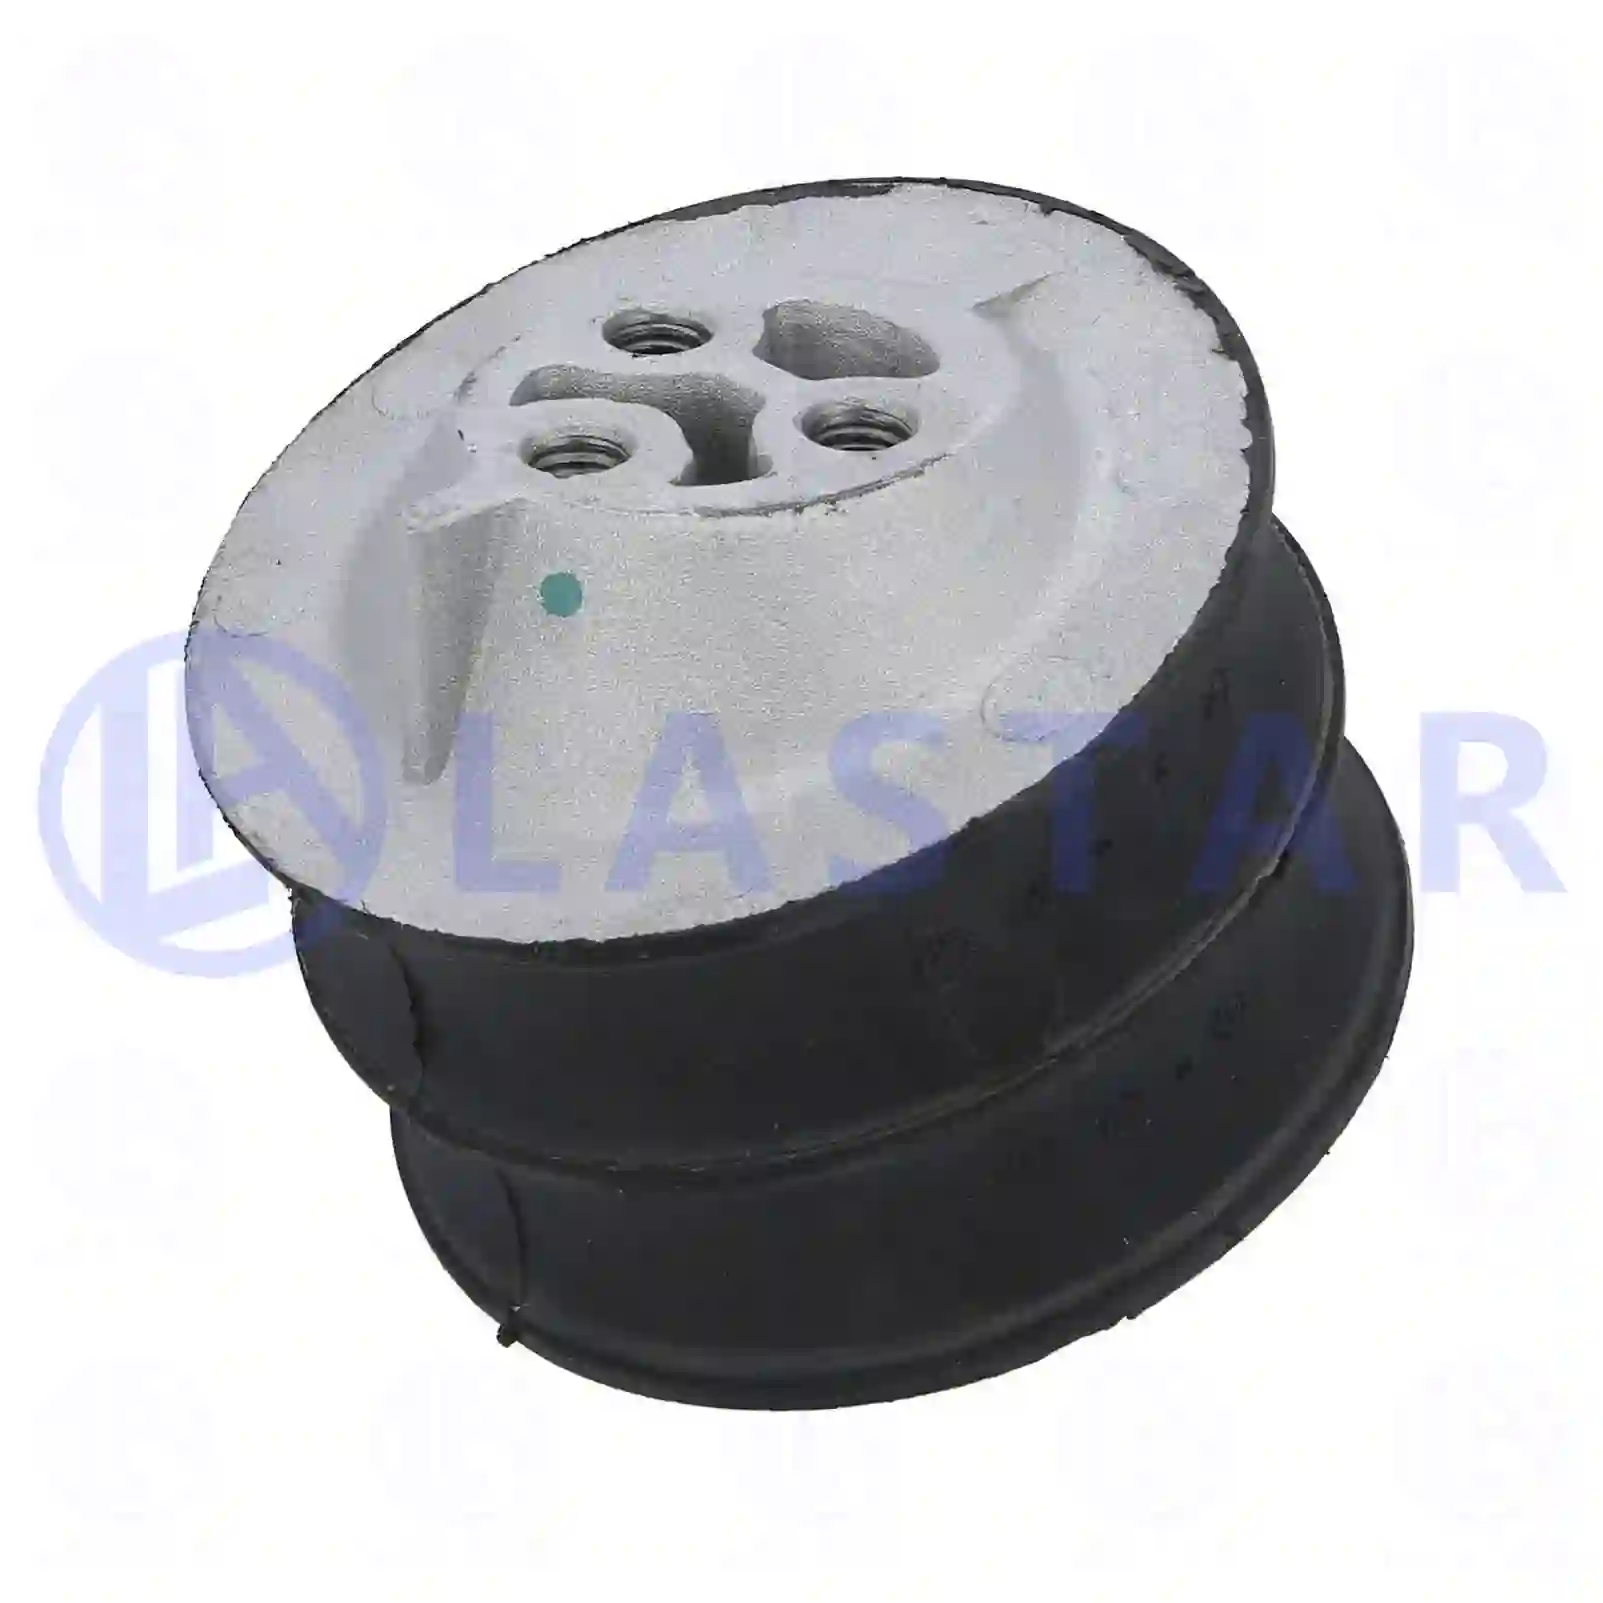 Rubber mounting, marked: green, 77704714, 1336885, 1423011, 1496288, 1778530, ZG40109-0008 ||  77704714 Lastar Spare Part | Truck Spare Parts, Auotomotive Spare Parts Rubber mounting, marked: green, 77704714, 1336885, 1423011, 1496288, 1778530, ZG40109-0008 ||  77704714 Lastar Spare Part | Truck Spare Parts, Auotomotive Spare Parts